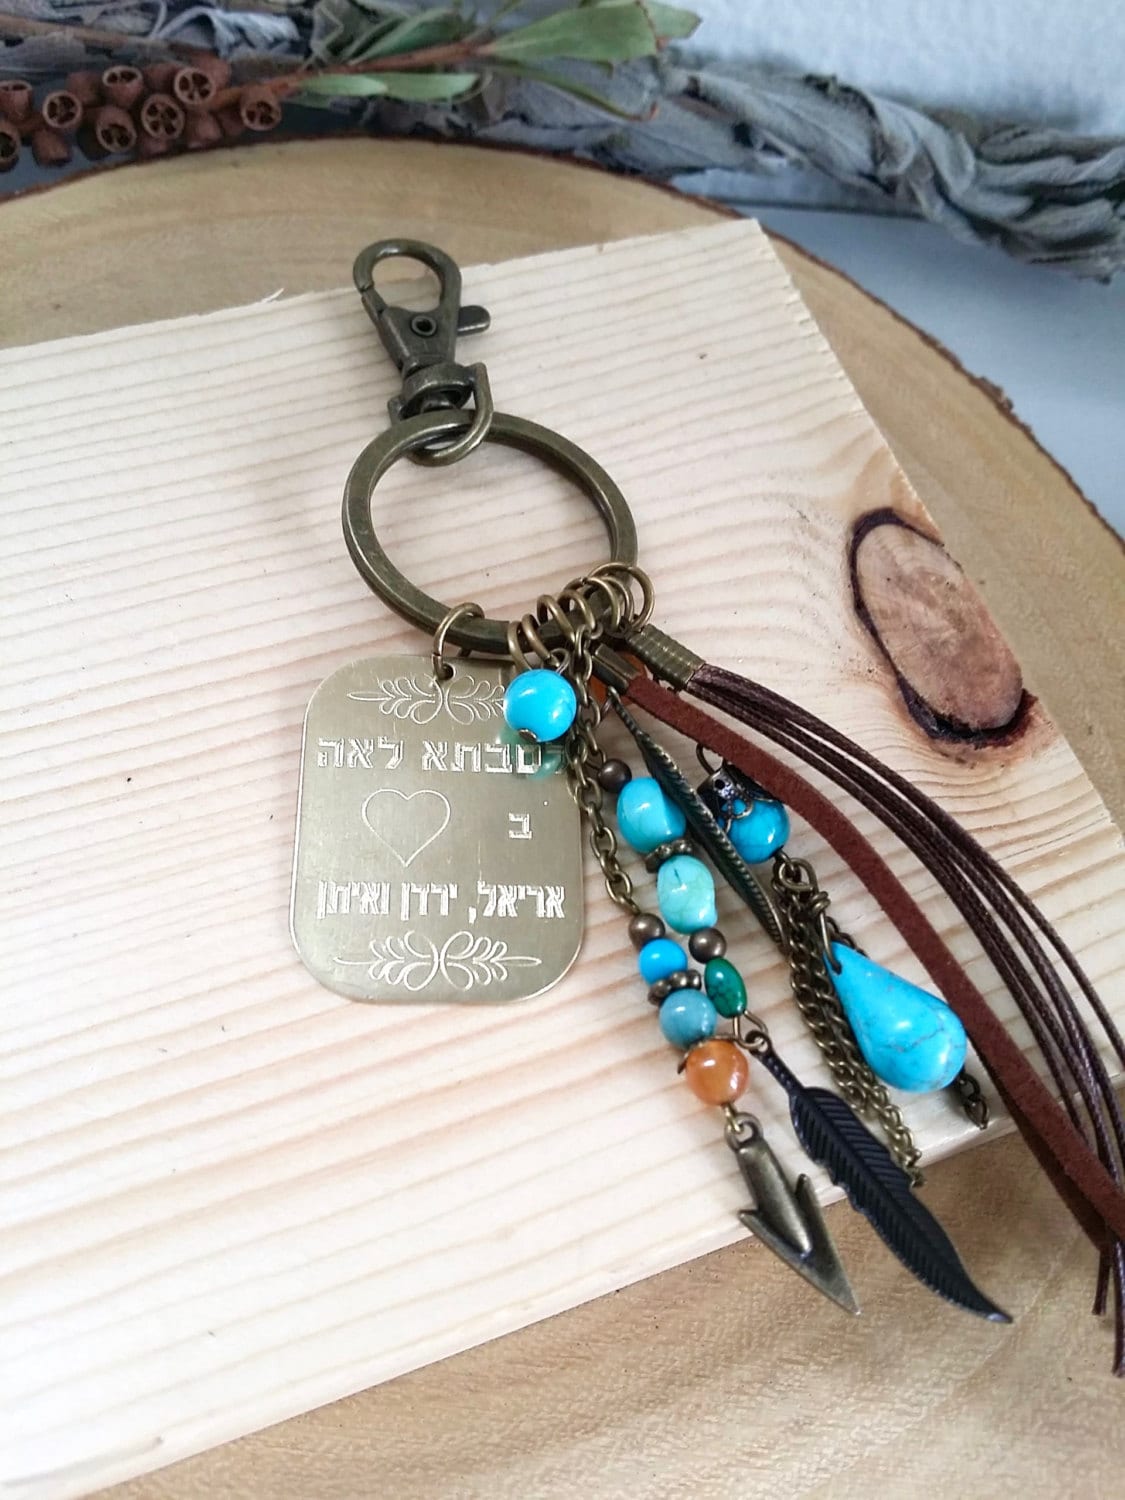 Personalized key chain, Engraved massage on key ring, Hebrew letters key charm, Mini mantra key chain, inspirational quote key holder plate